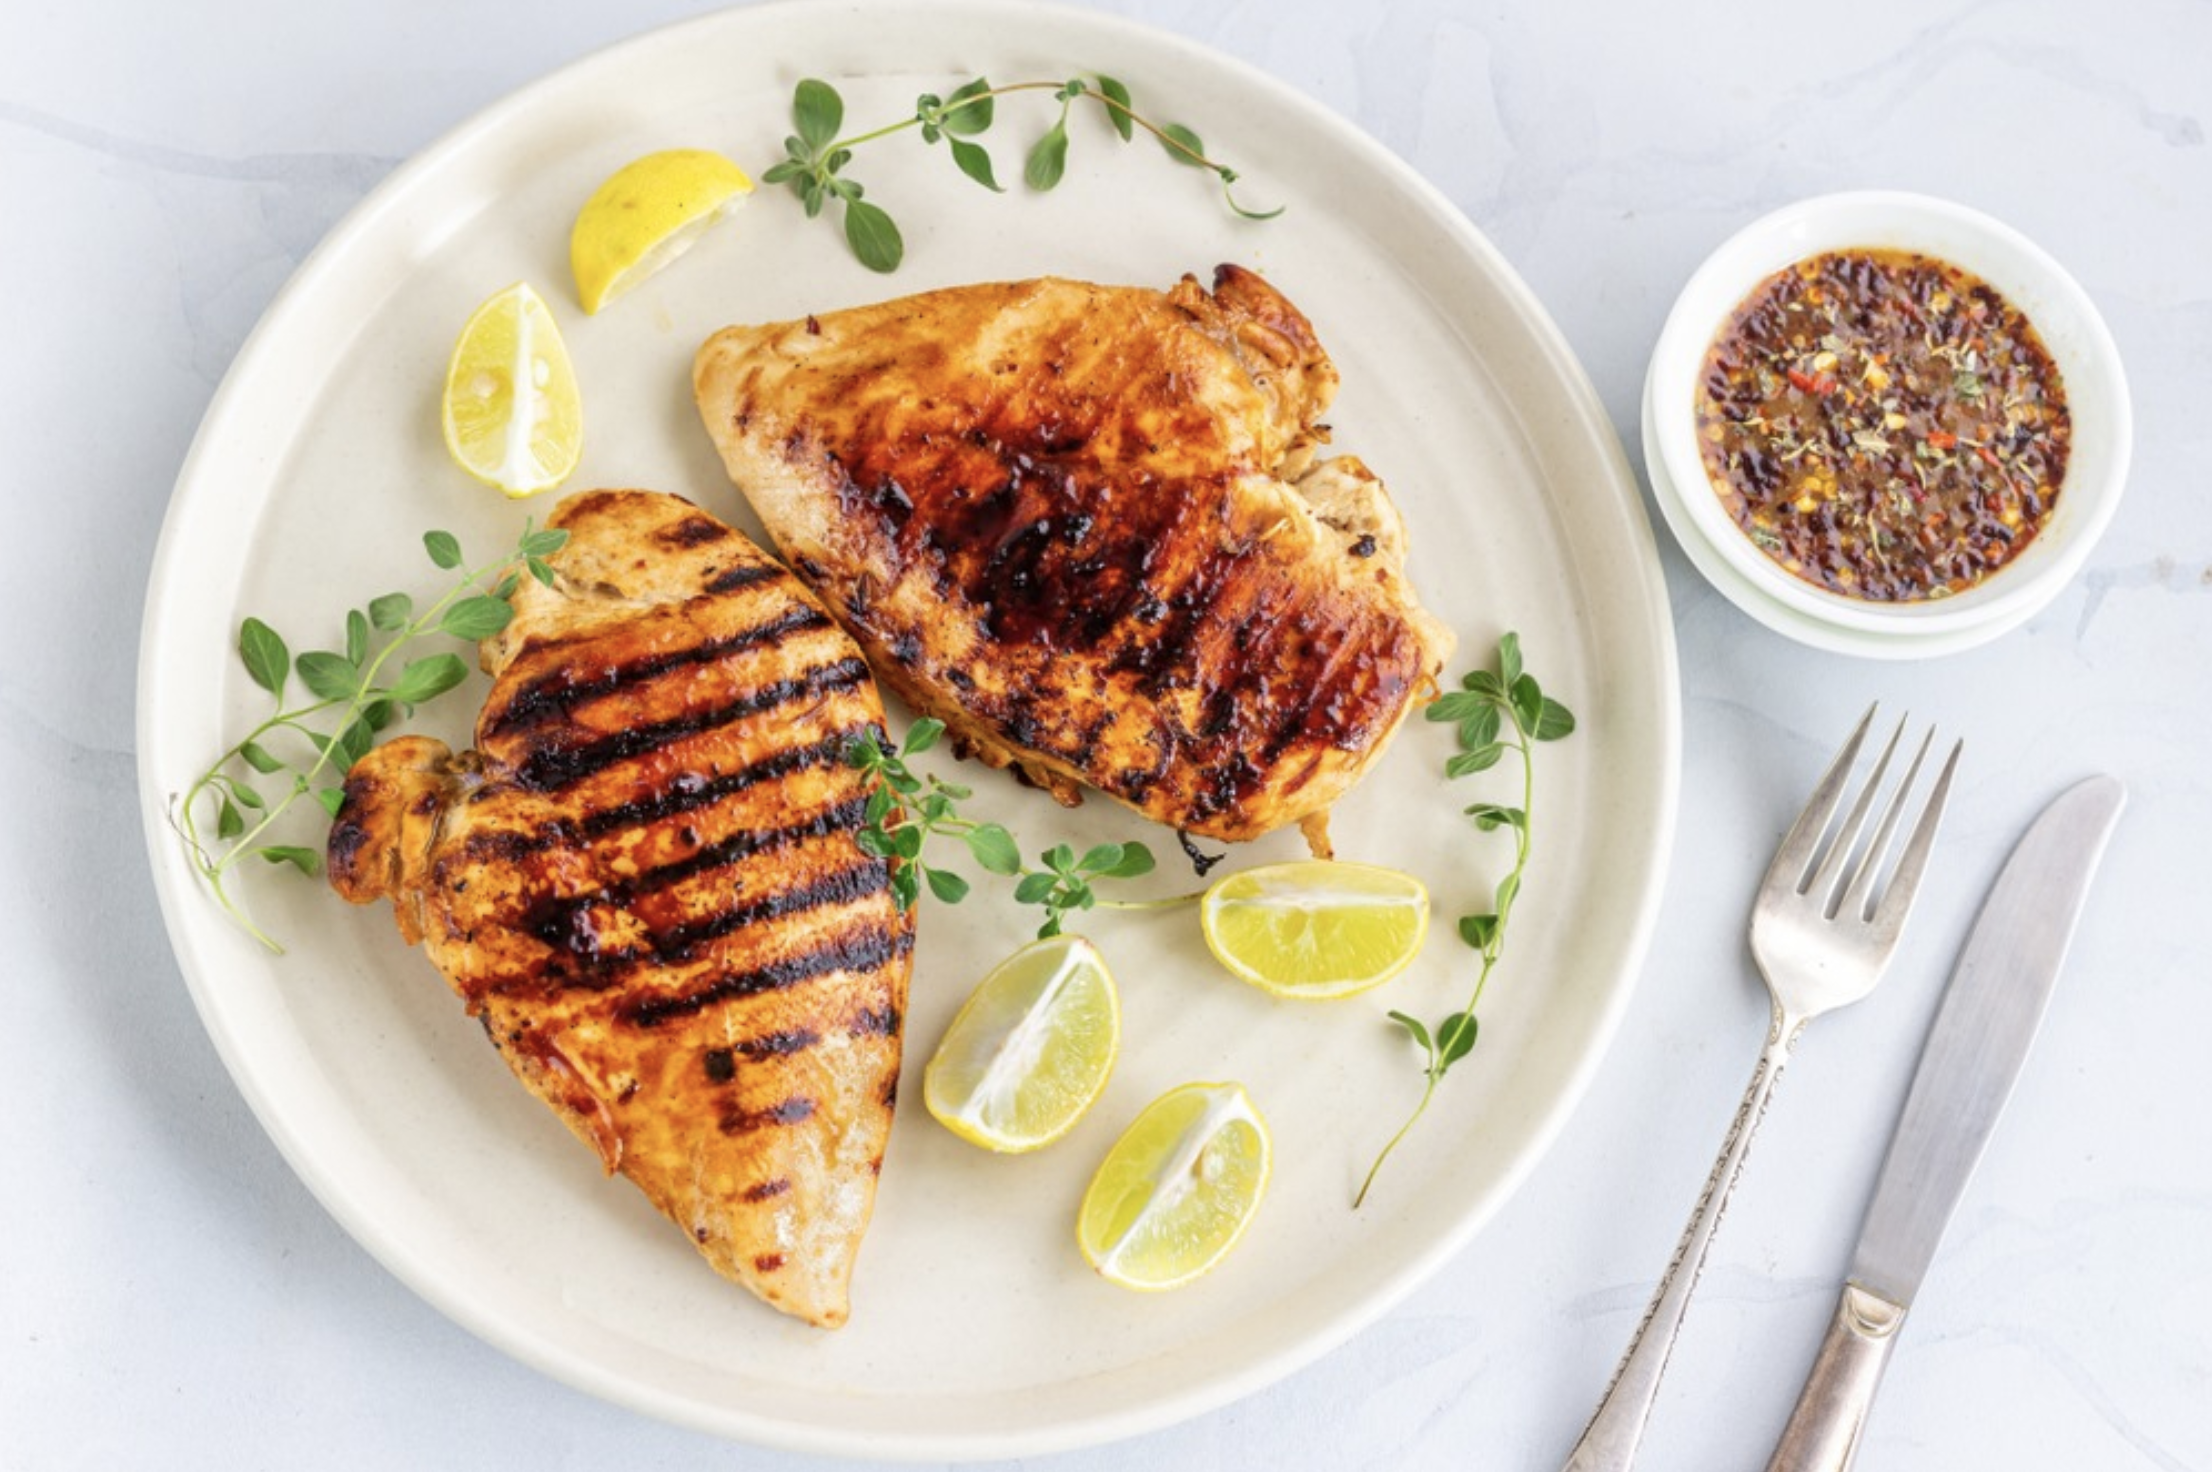 You-should-prepare-the-chicken-carefully-before-grilling